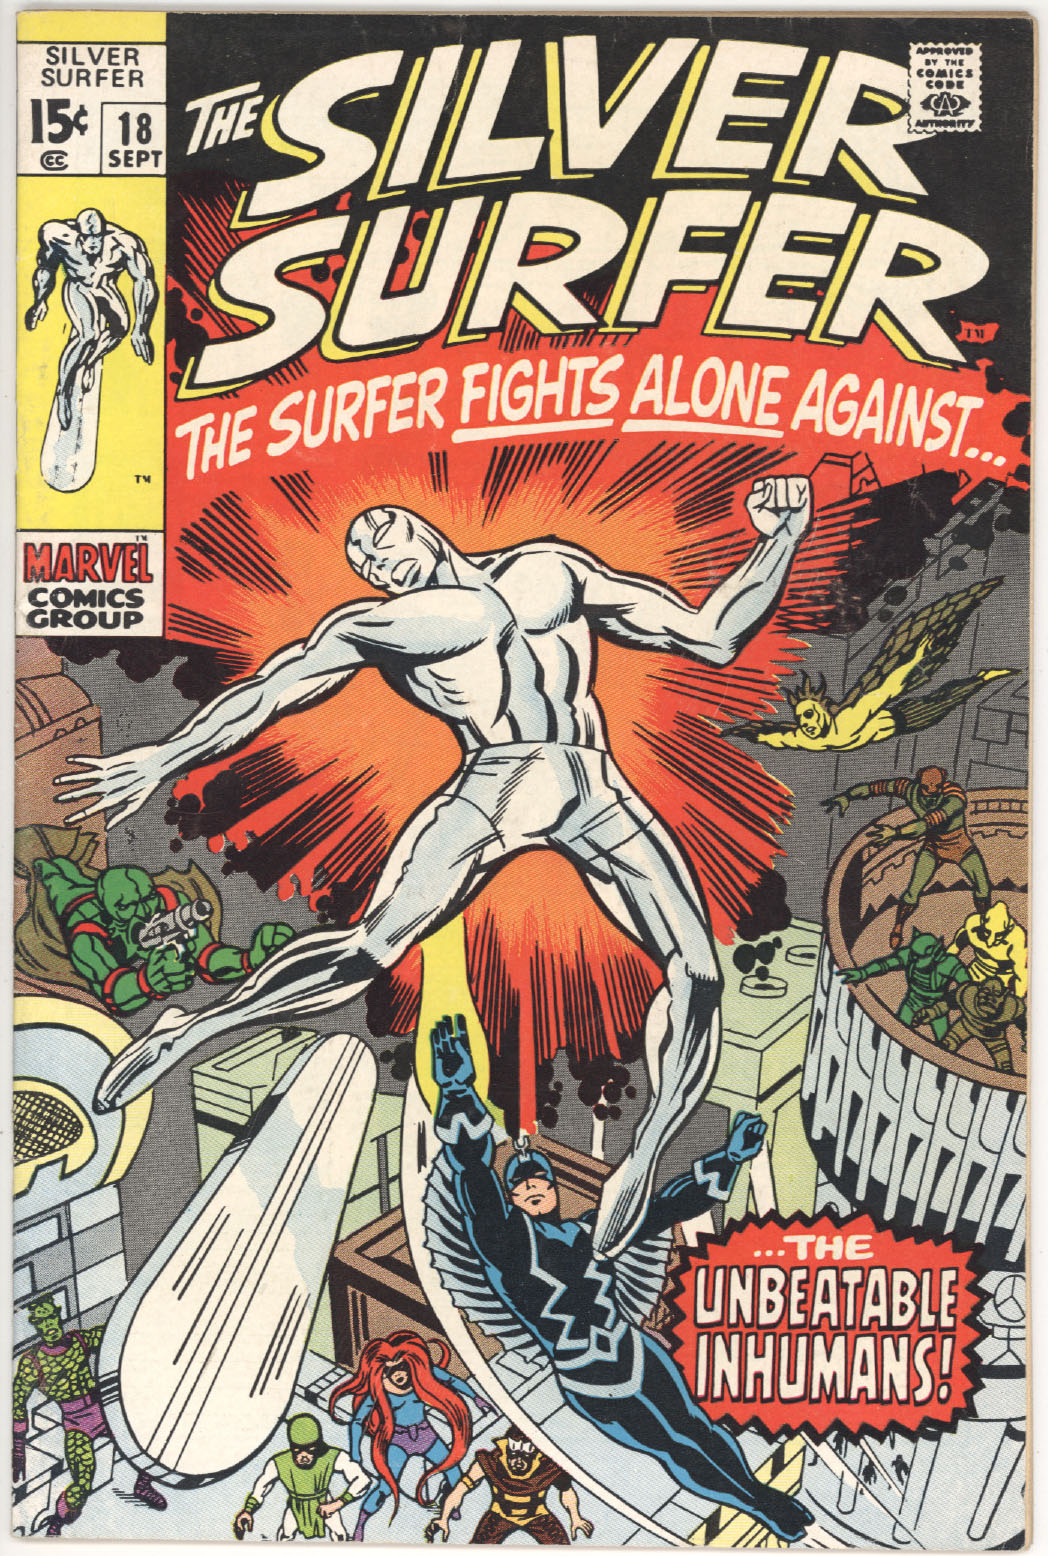 Silver Surfer #18 front